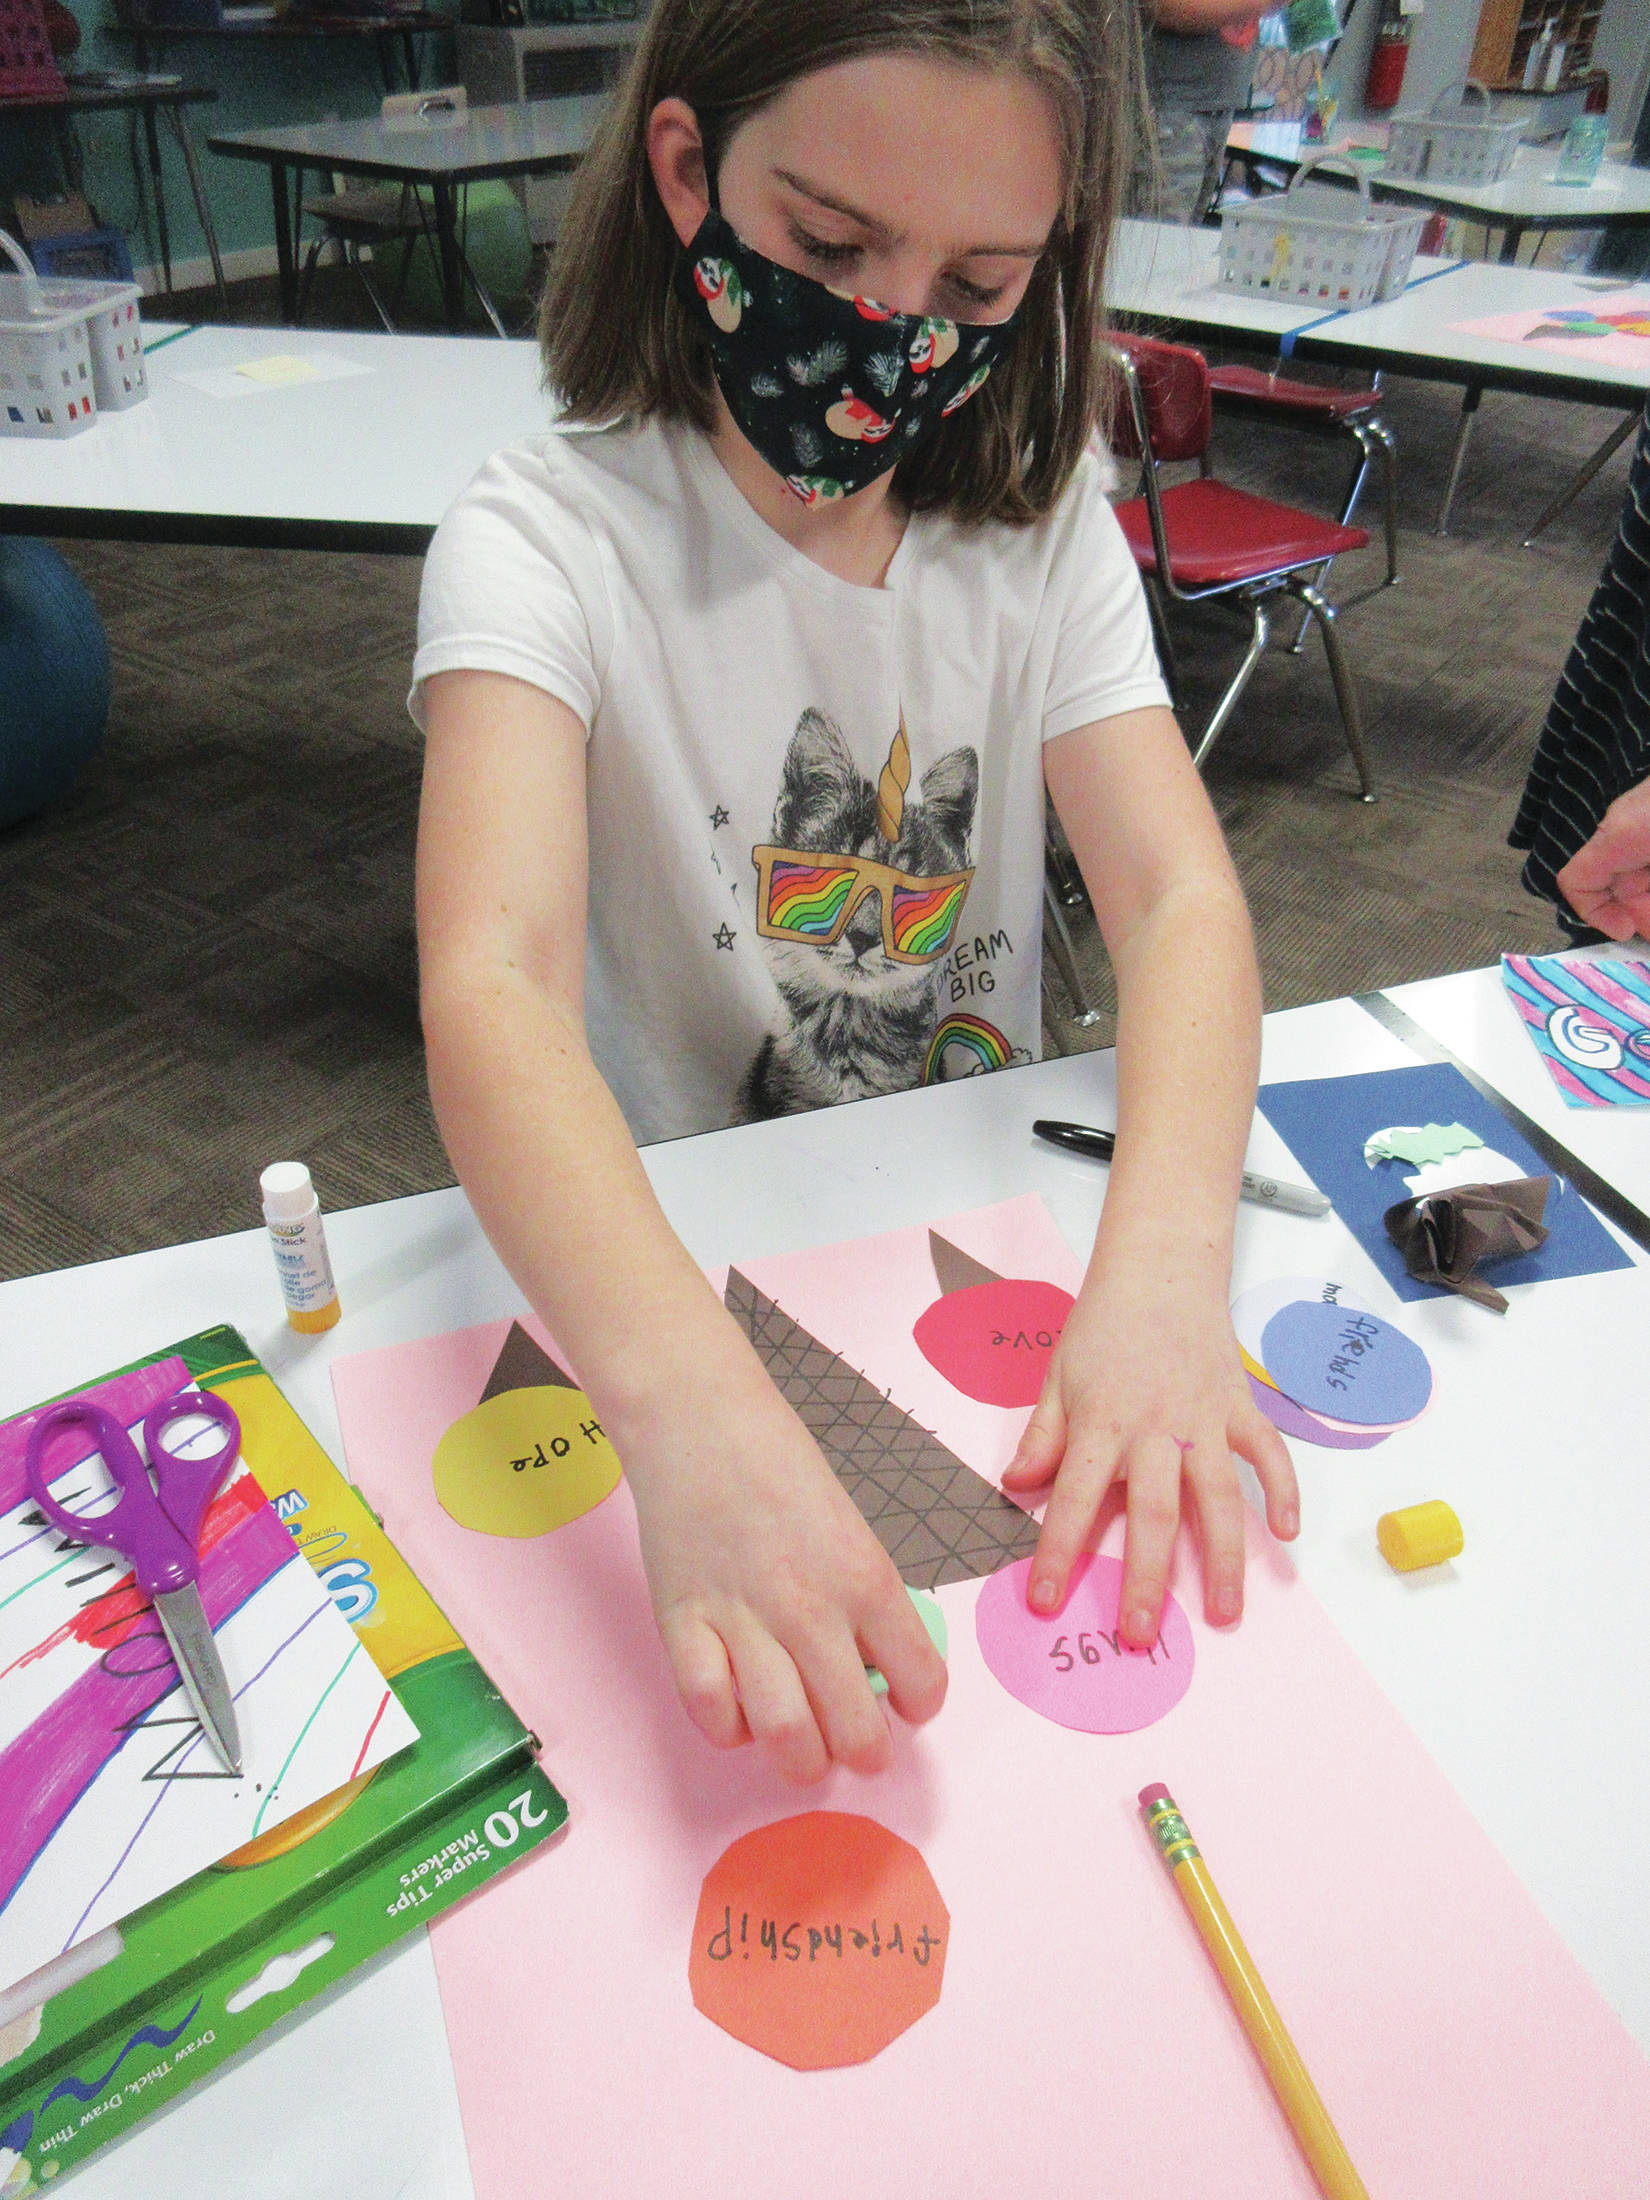 Student Willow Bouman works on a “thankful ice cream” art project on Monday, Jan. 11, 2021 at Fireweed Academy in Homer, Alaska. Students in elementary school were able to return to onsite education five days a week starting Monday. (Photo courtesy Joni Wise/West Homer Elementary School)